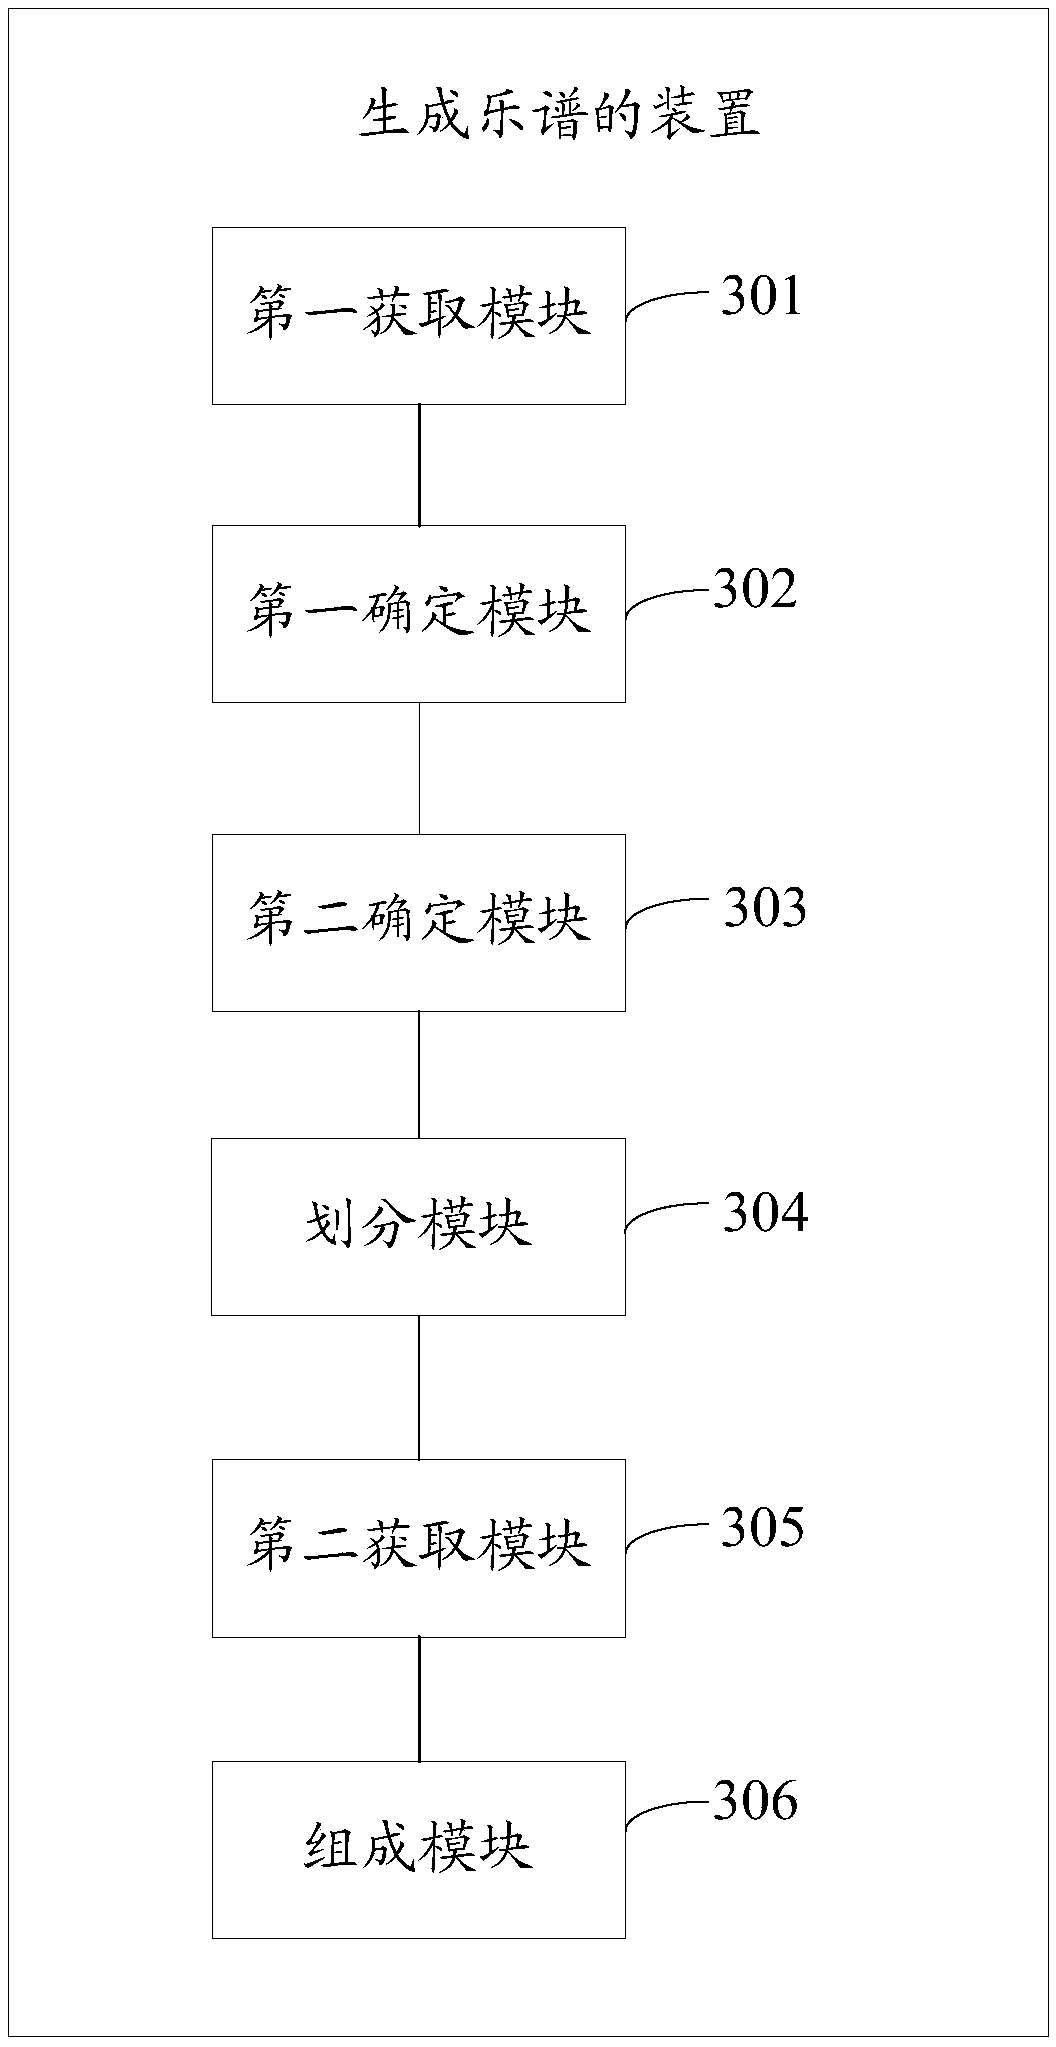 Method and device for generating musical scores